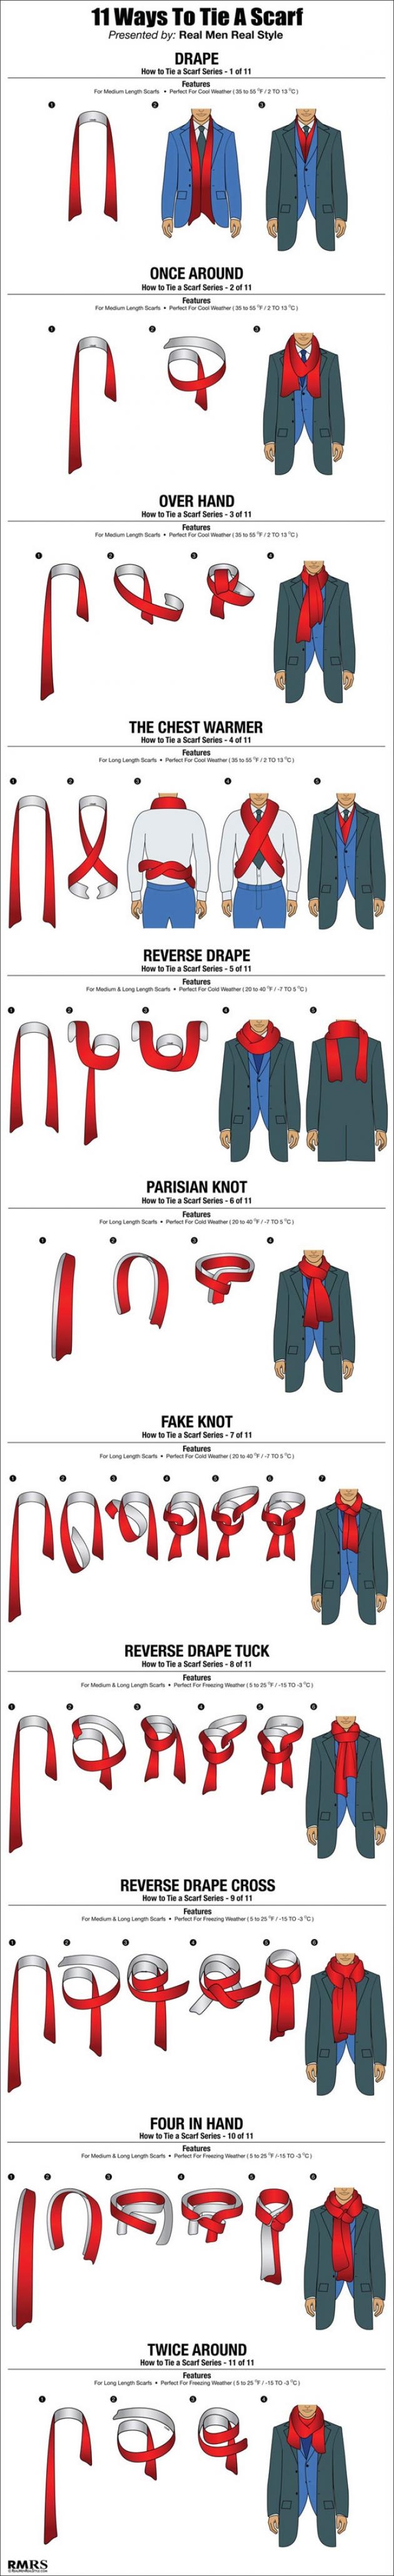 How to wear a scarf properly.